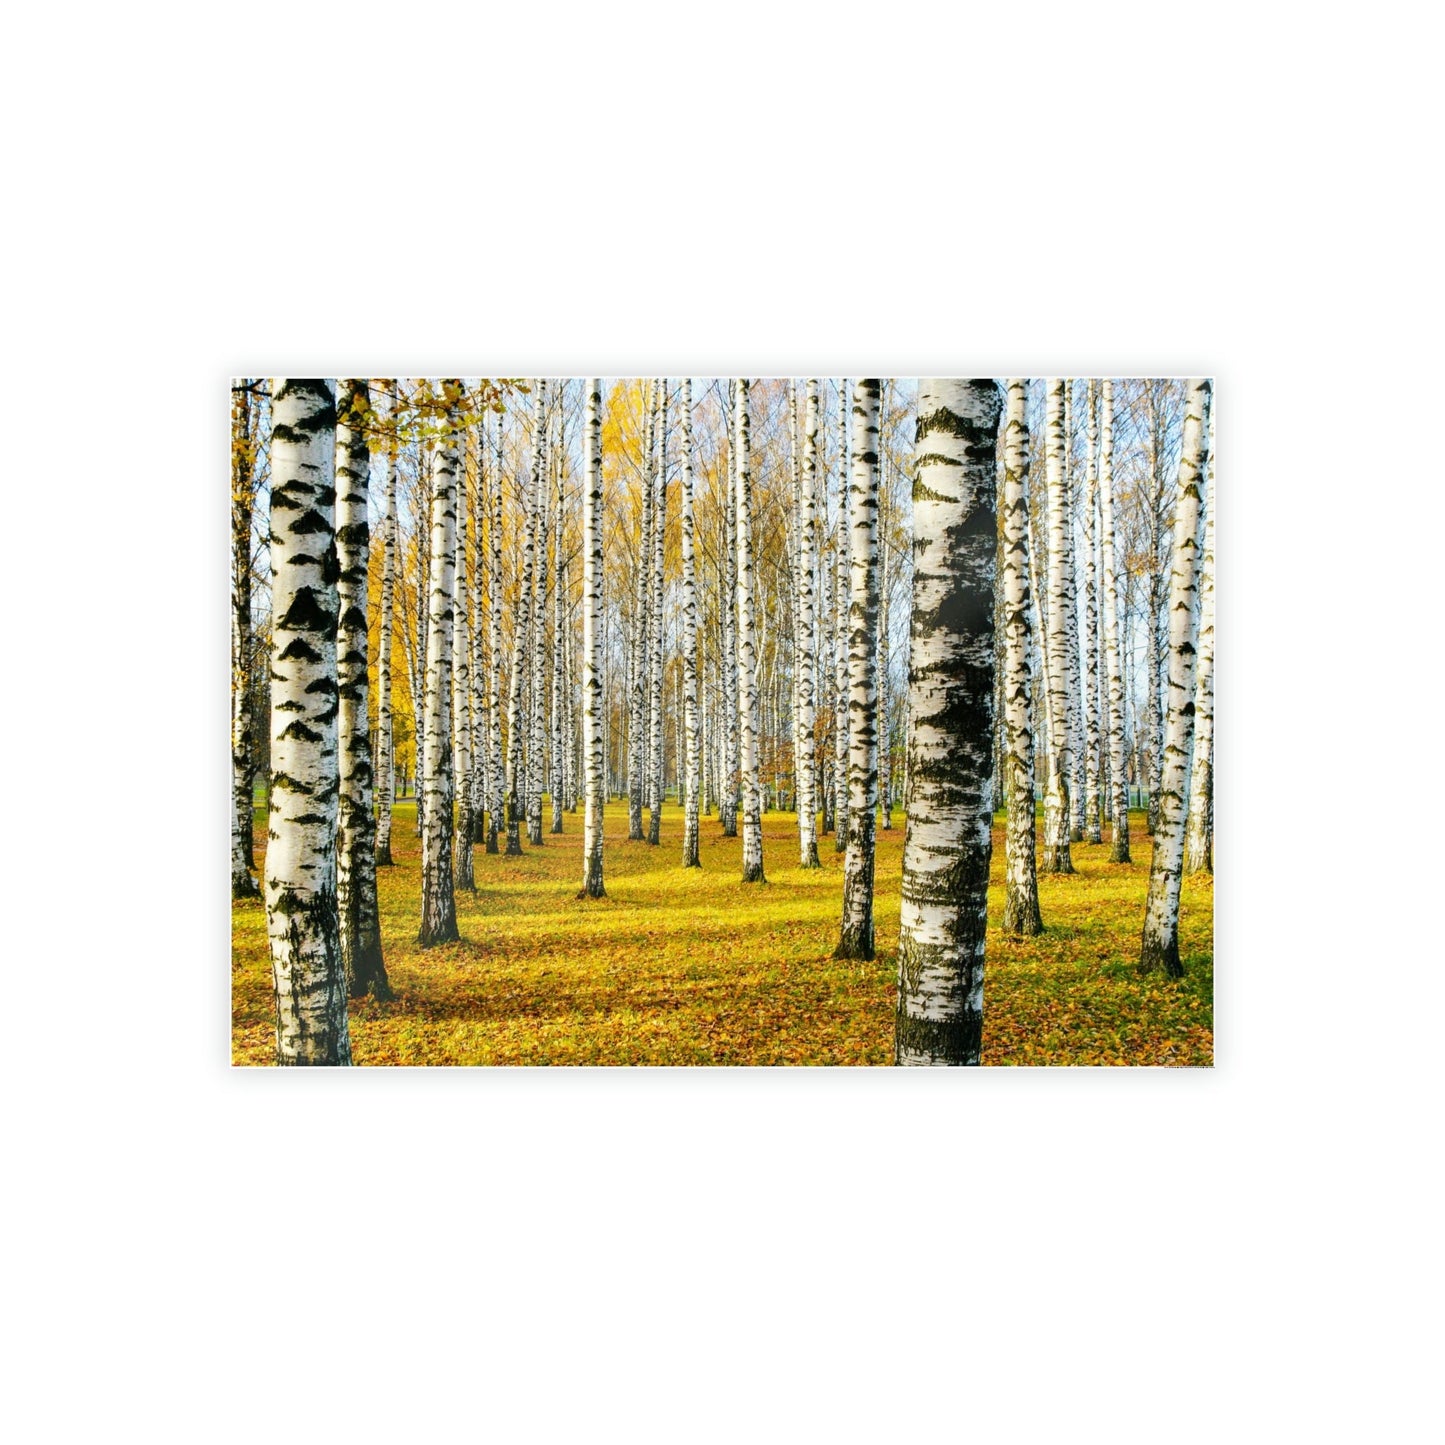 The Serene Beauty of Aspen Trees: Wall Art for Your Home